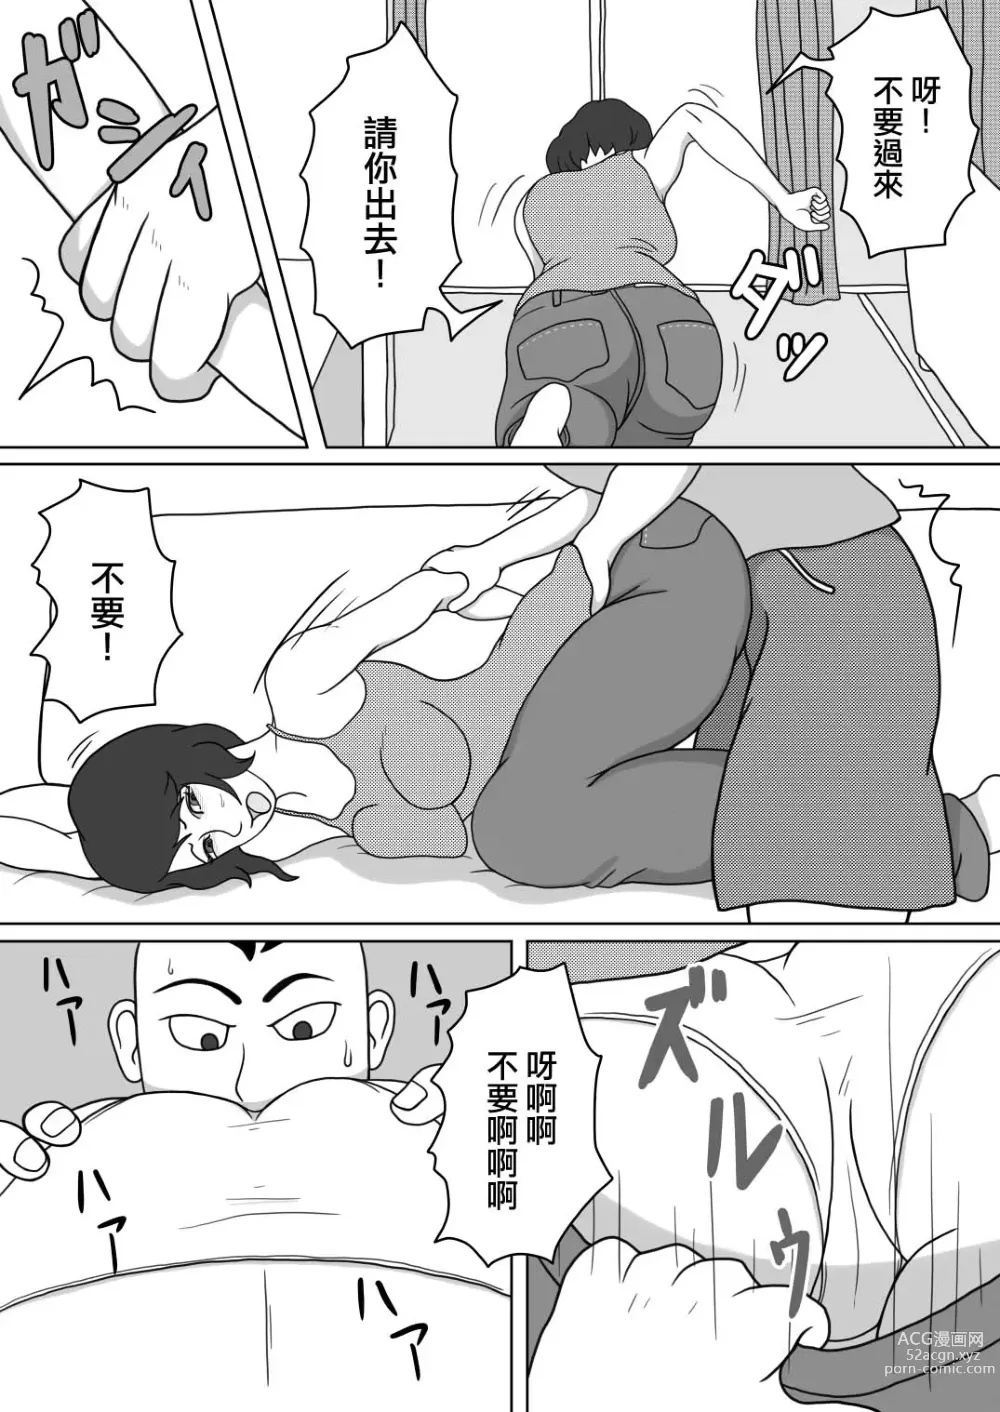 Page 10 of doujinshi 201號房的鄰居